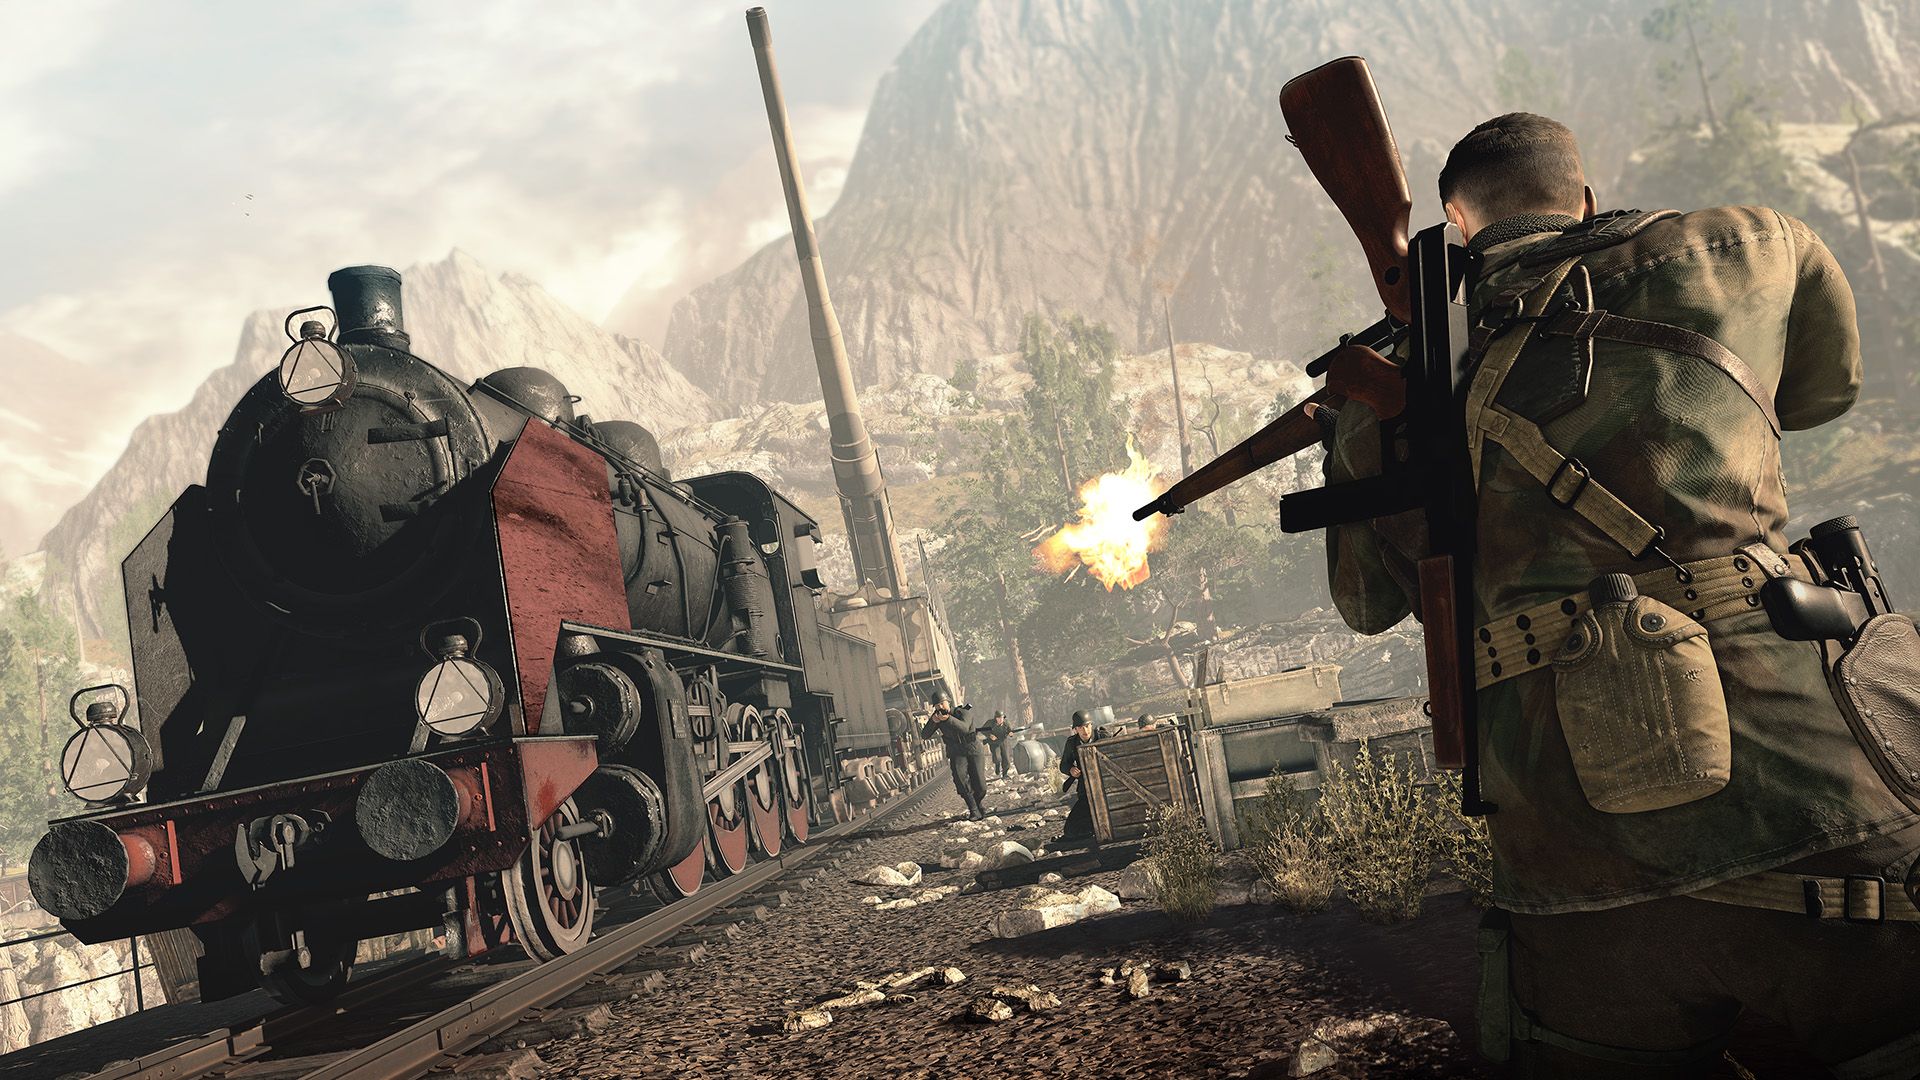 Sniper Elite 4 is one of the most strategic shooters out there